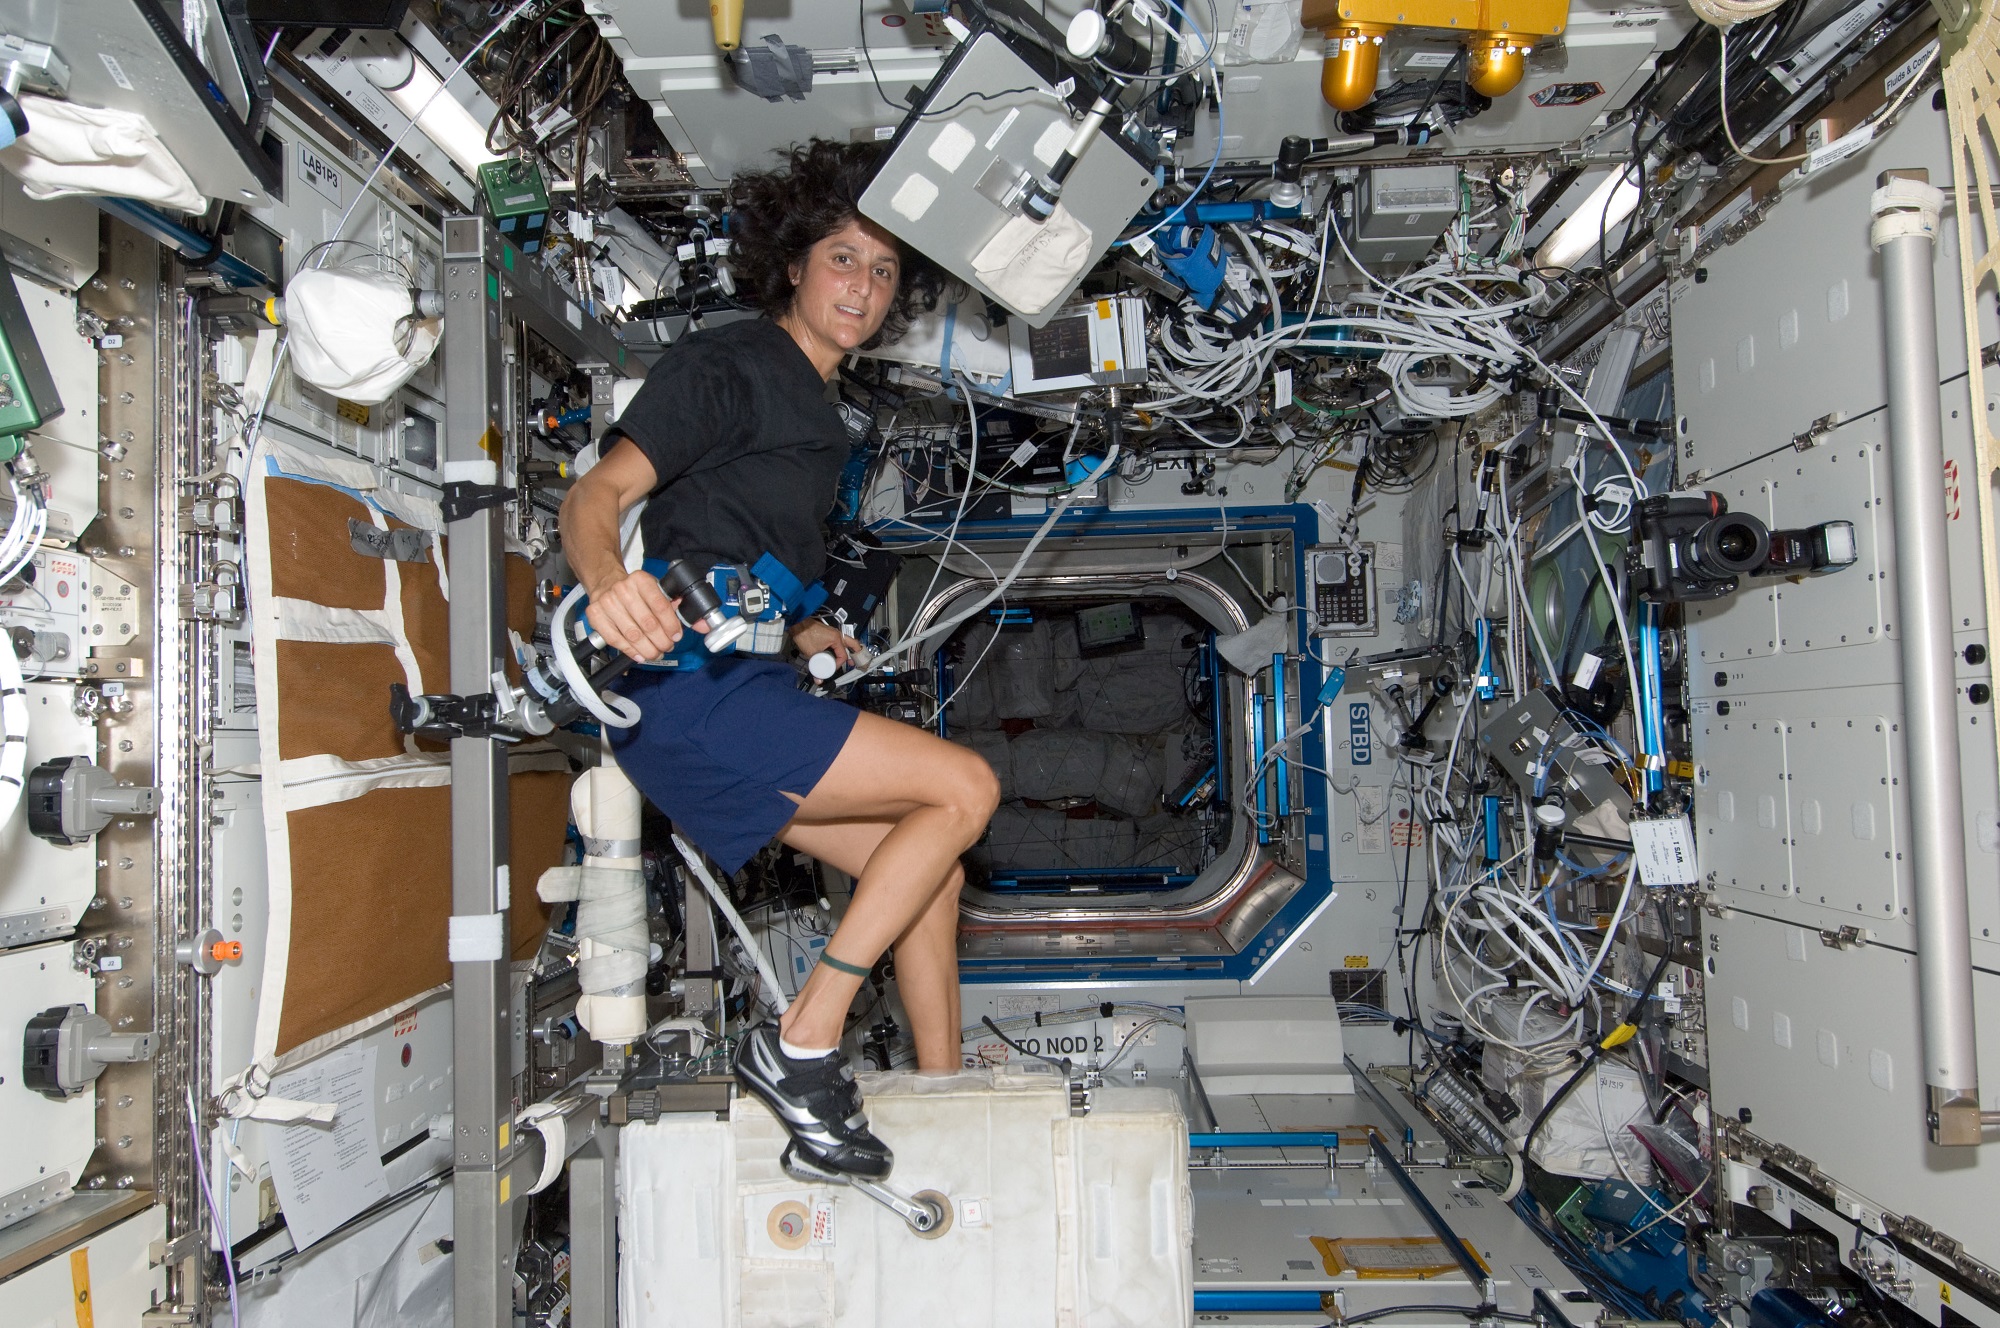 NASA astronaut with long brown hair and brown skin exercising on an erg machine in space to improve bone density